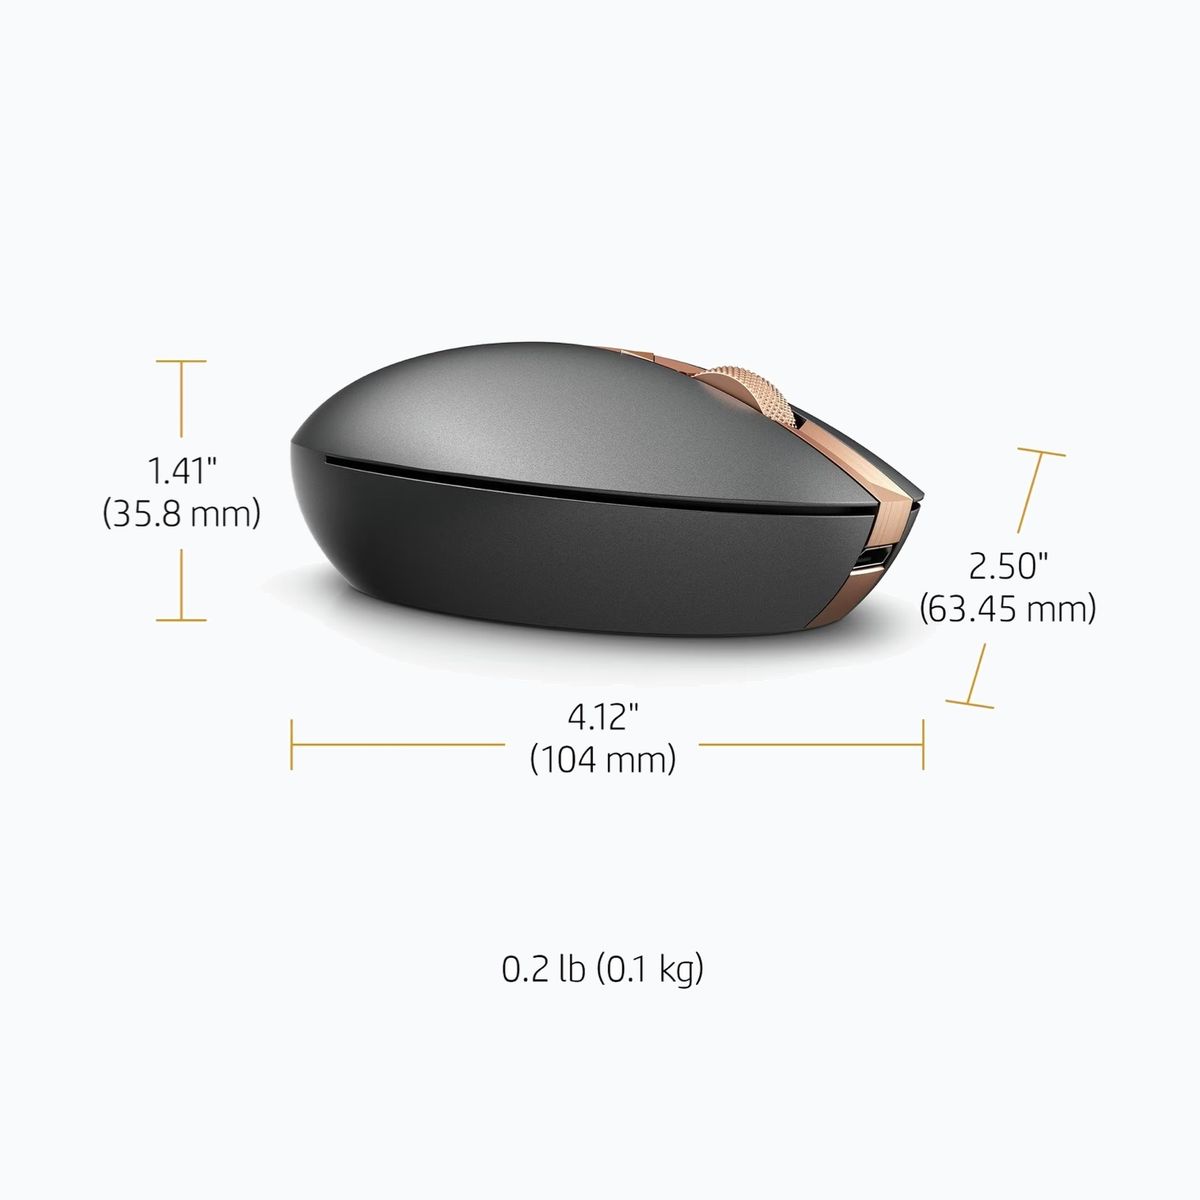 hp-spectre-mouse-700--new-3.jpg